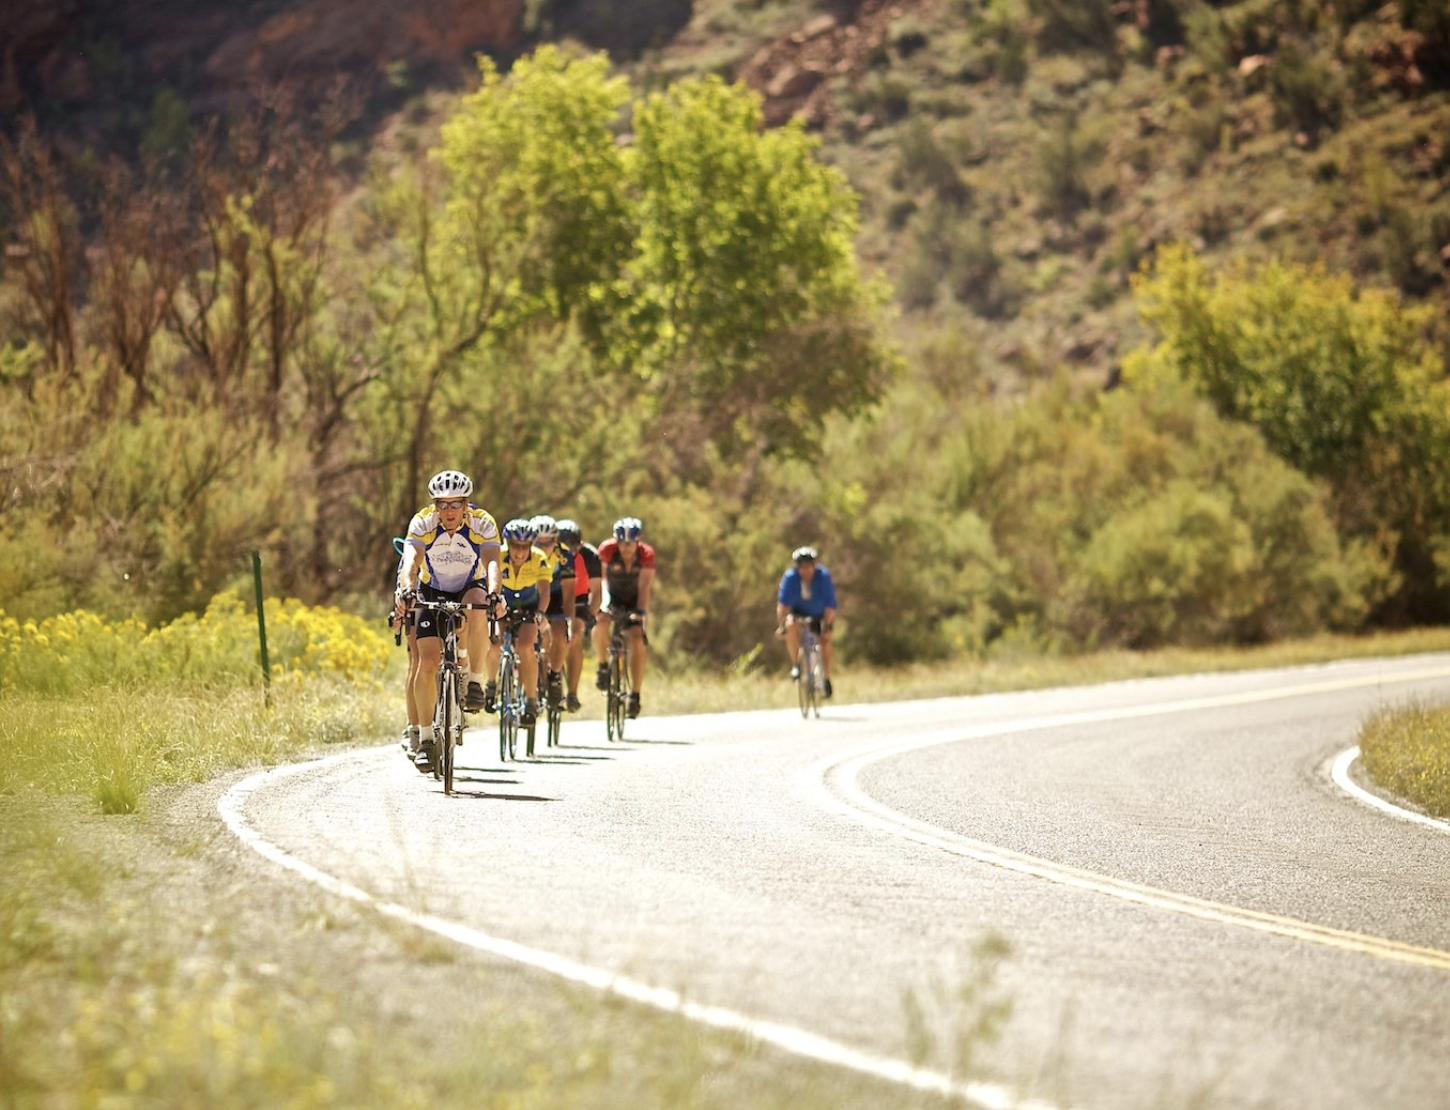 Group of cyclists rounding the bend